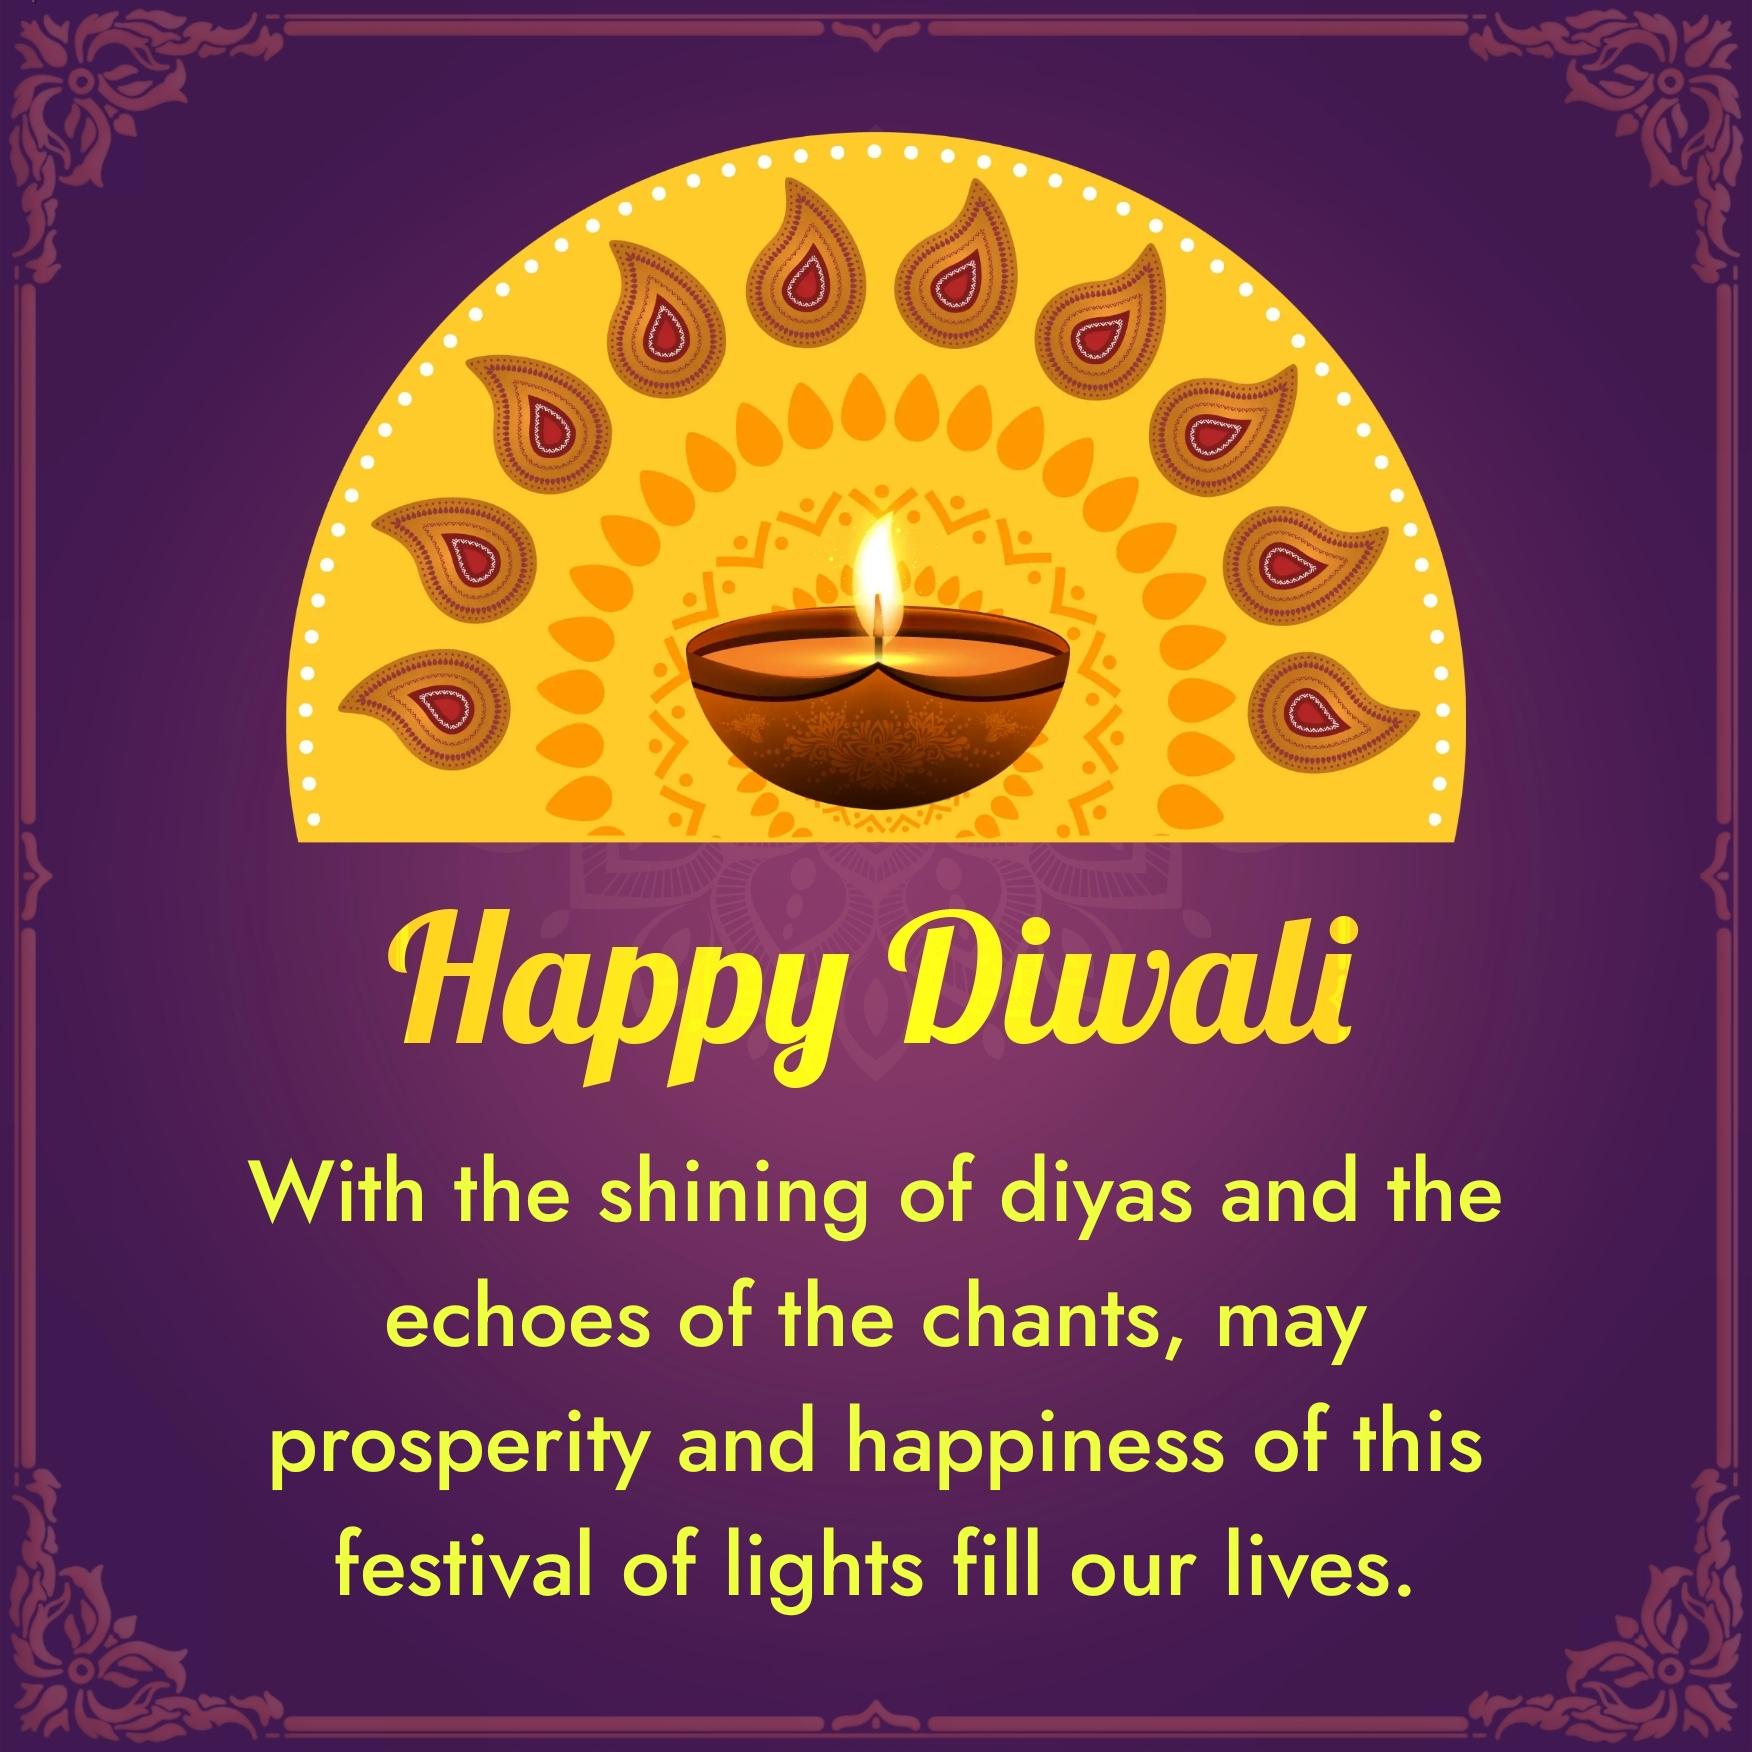 With the shining of diyas and the echoes of the chants